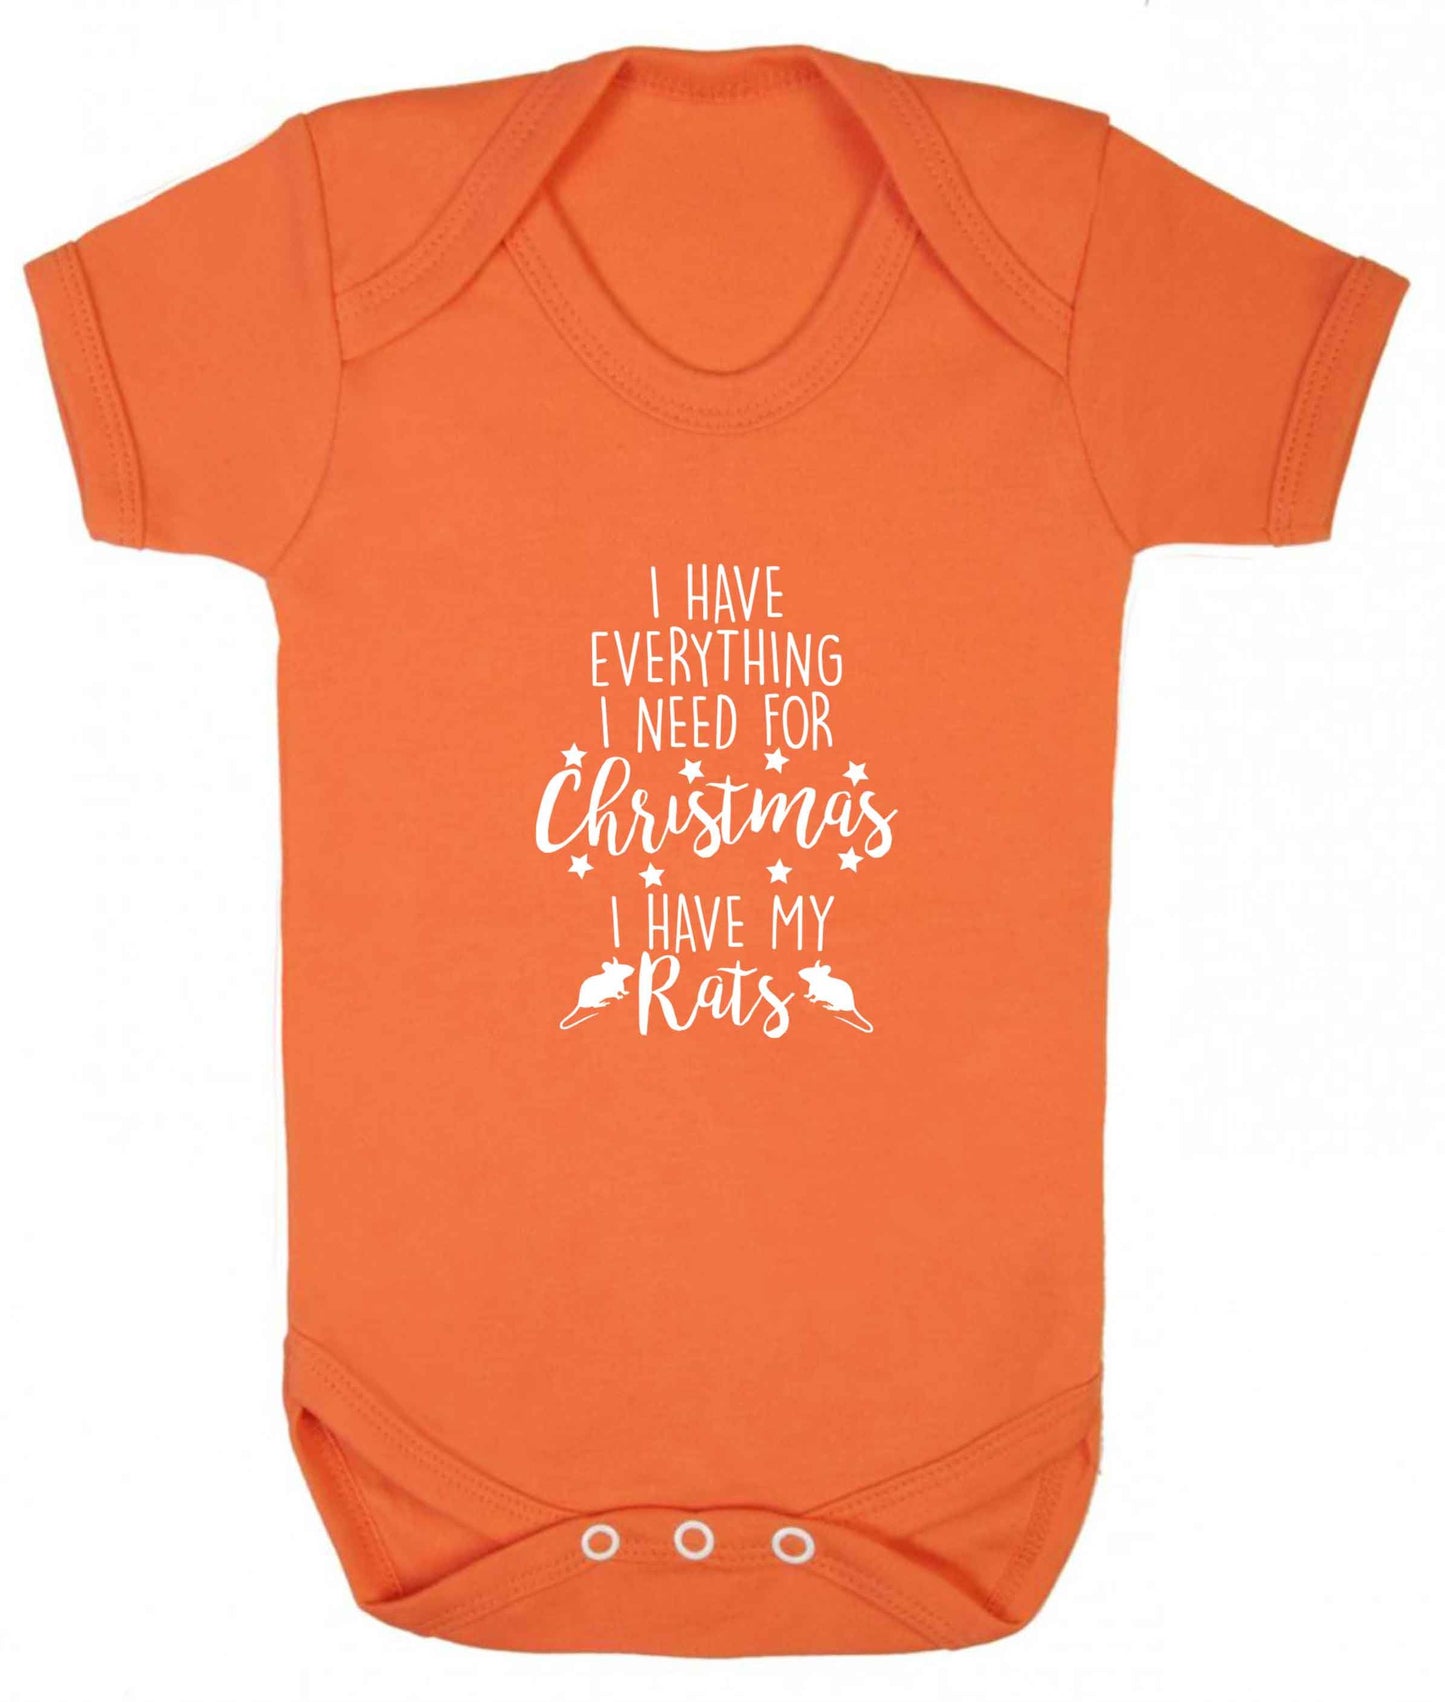 I have everything I need for Christmas I have my rats baby vest orange 18-24 months